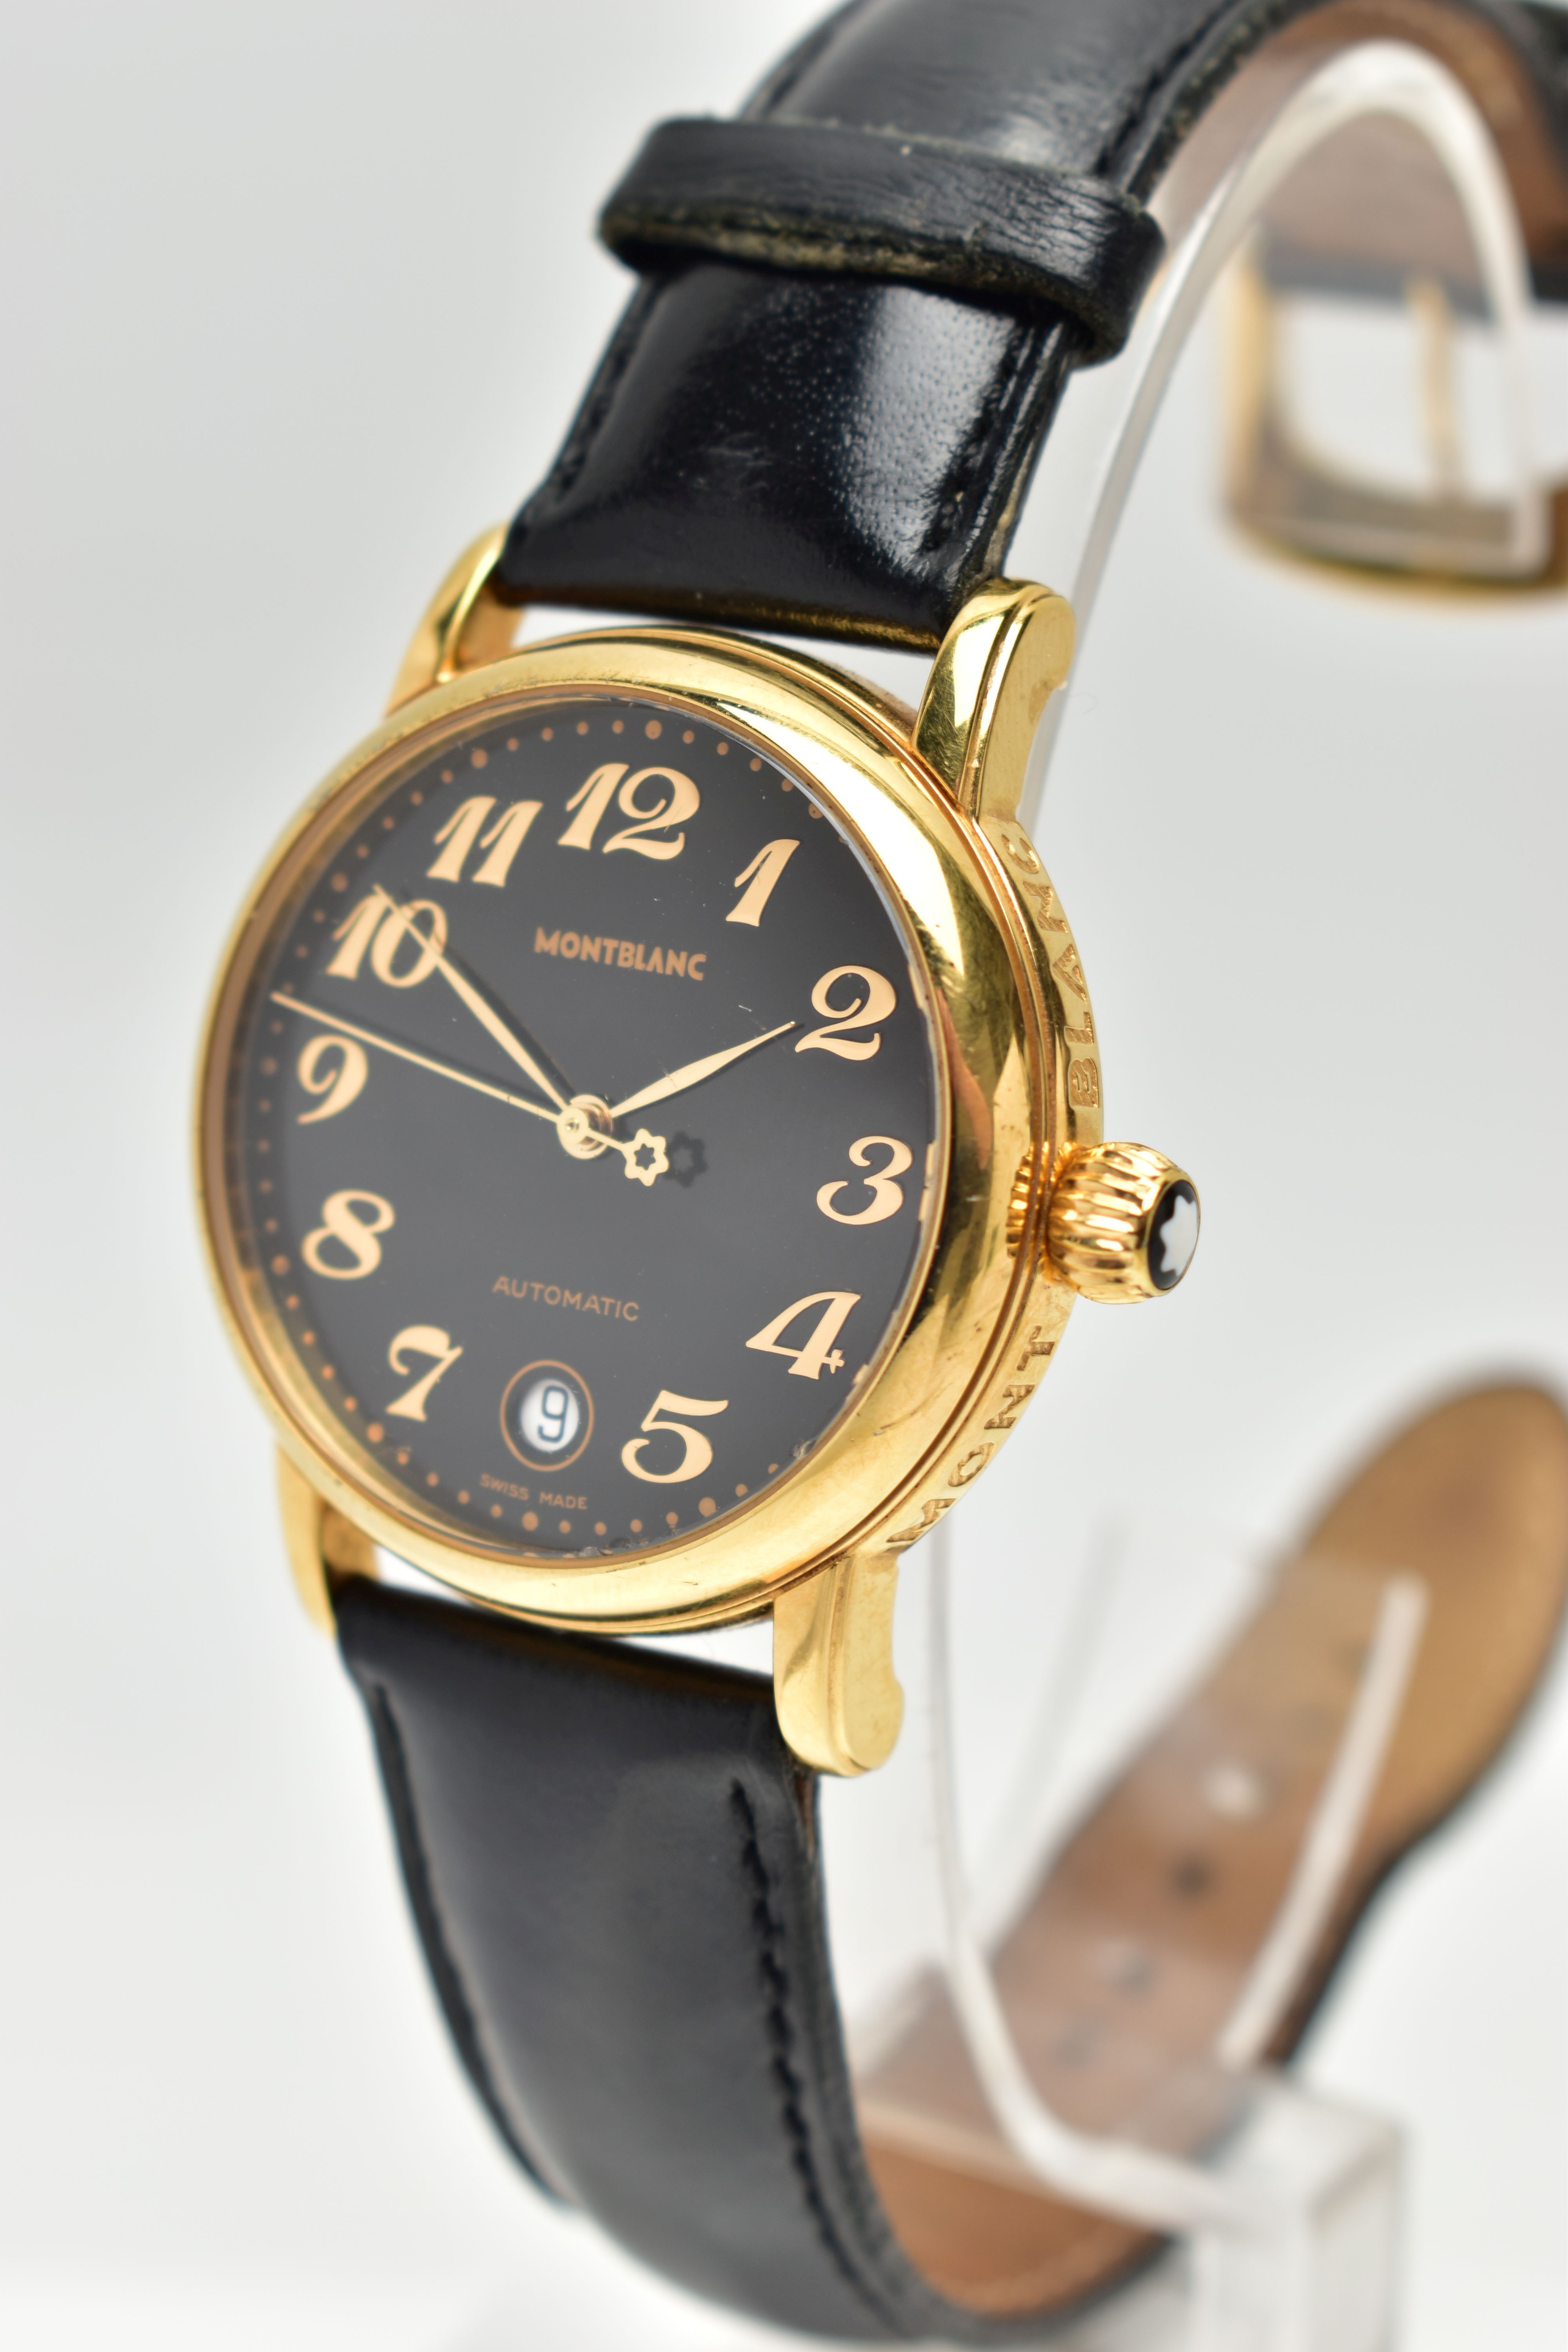 A GENTS 'MONTBLANC' WRISTWATCH, Automatic, round black dial signed 'Montblanc, Automatic', Arabic - Image 3 of 7